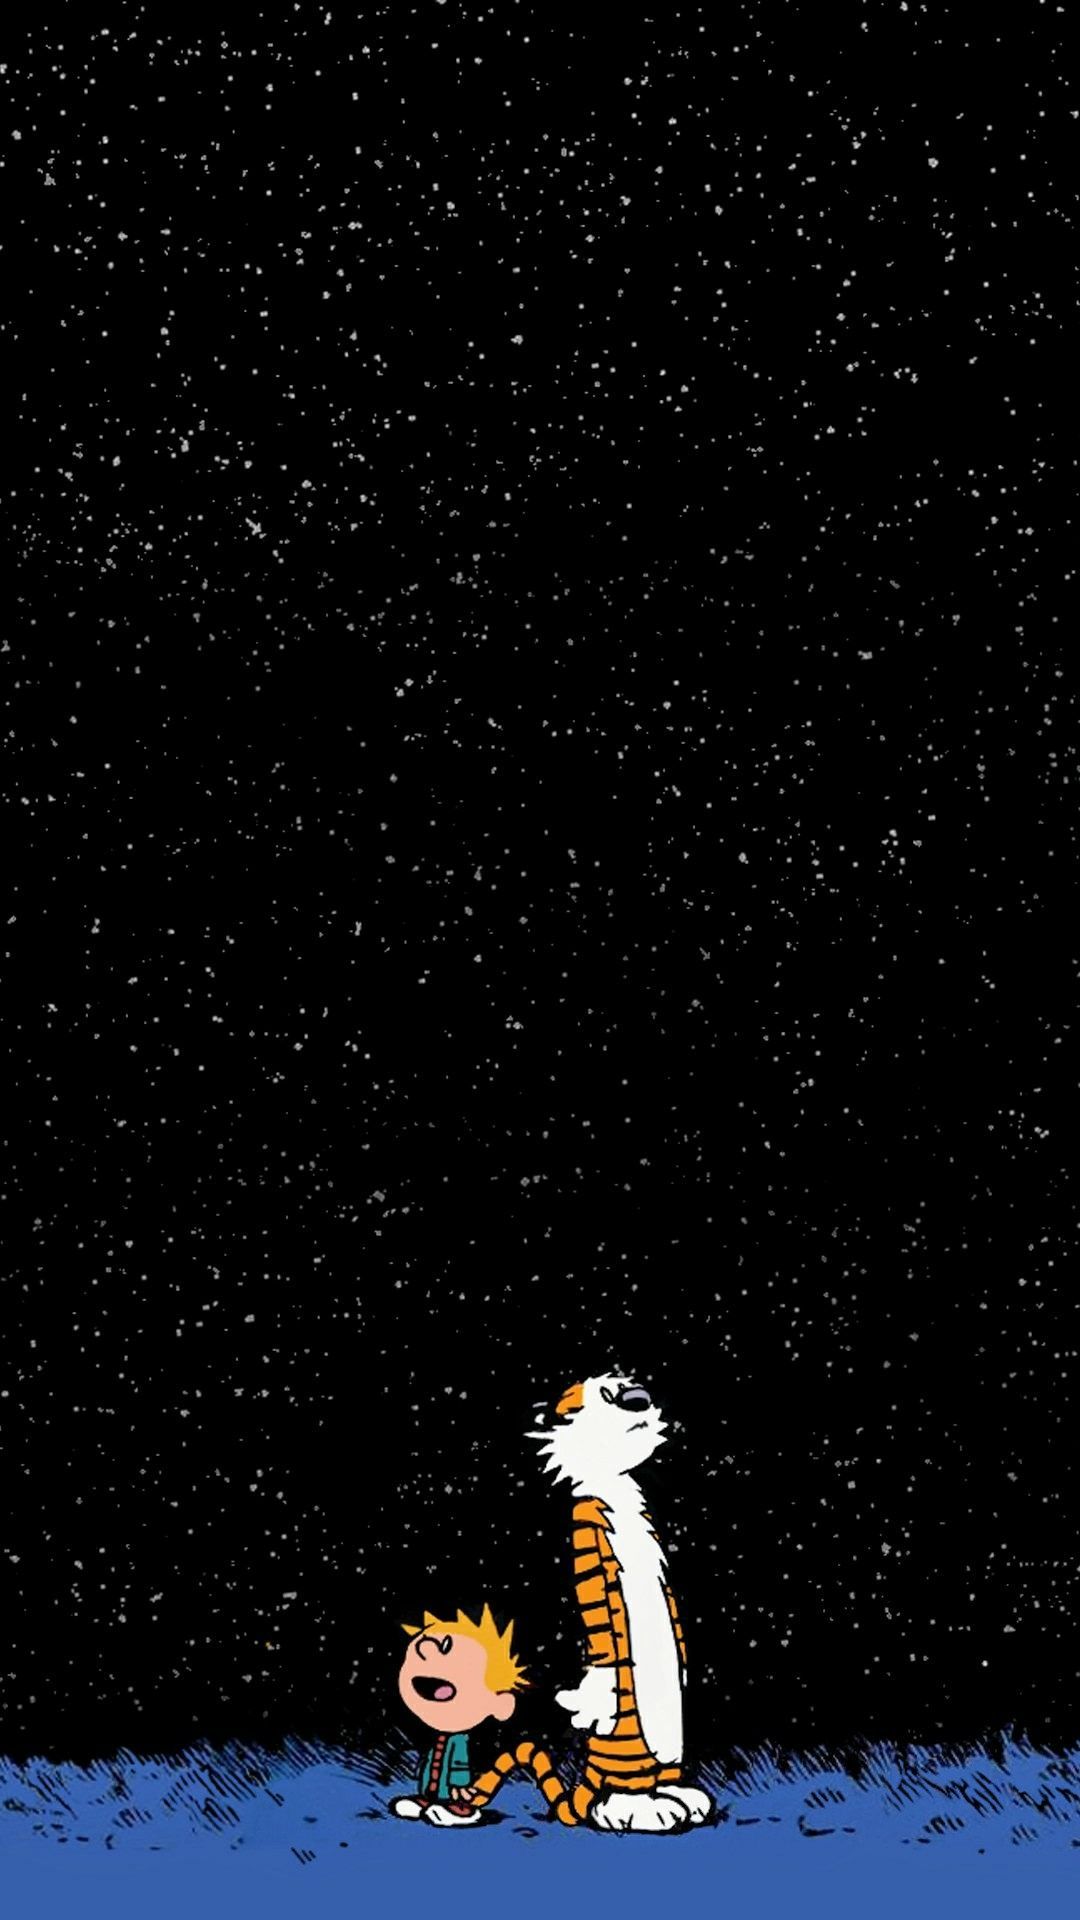 Request Can anyone turn this Calvin and hobbes wallpaper into an